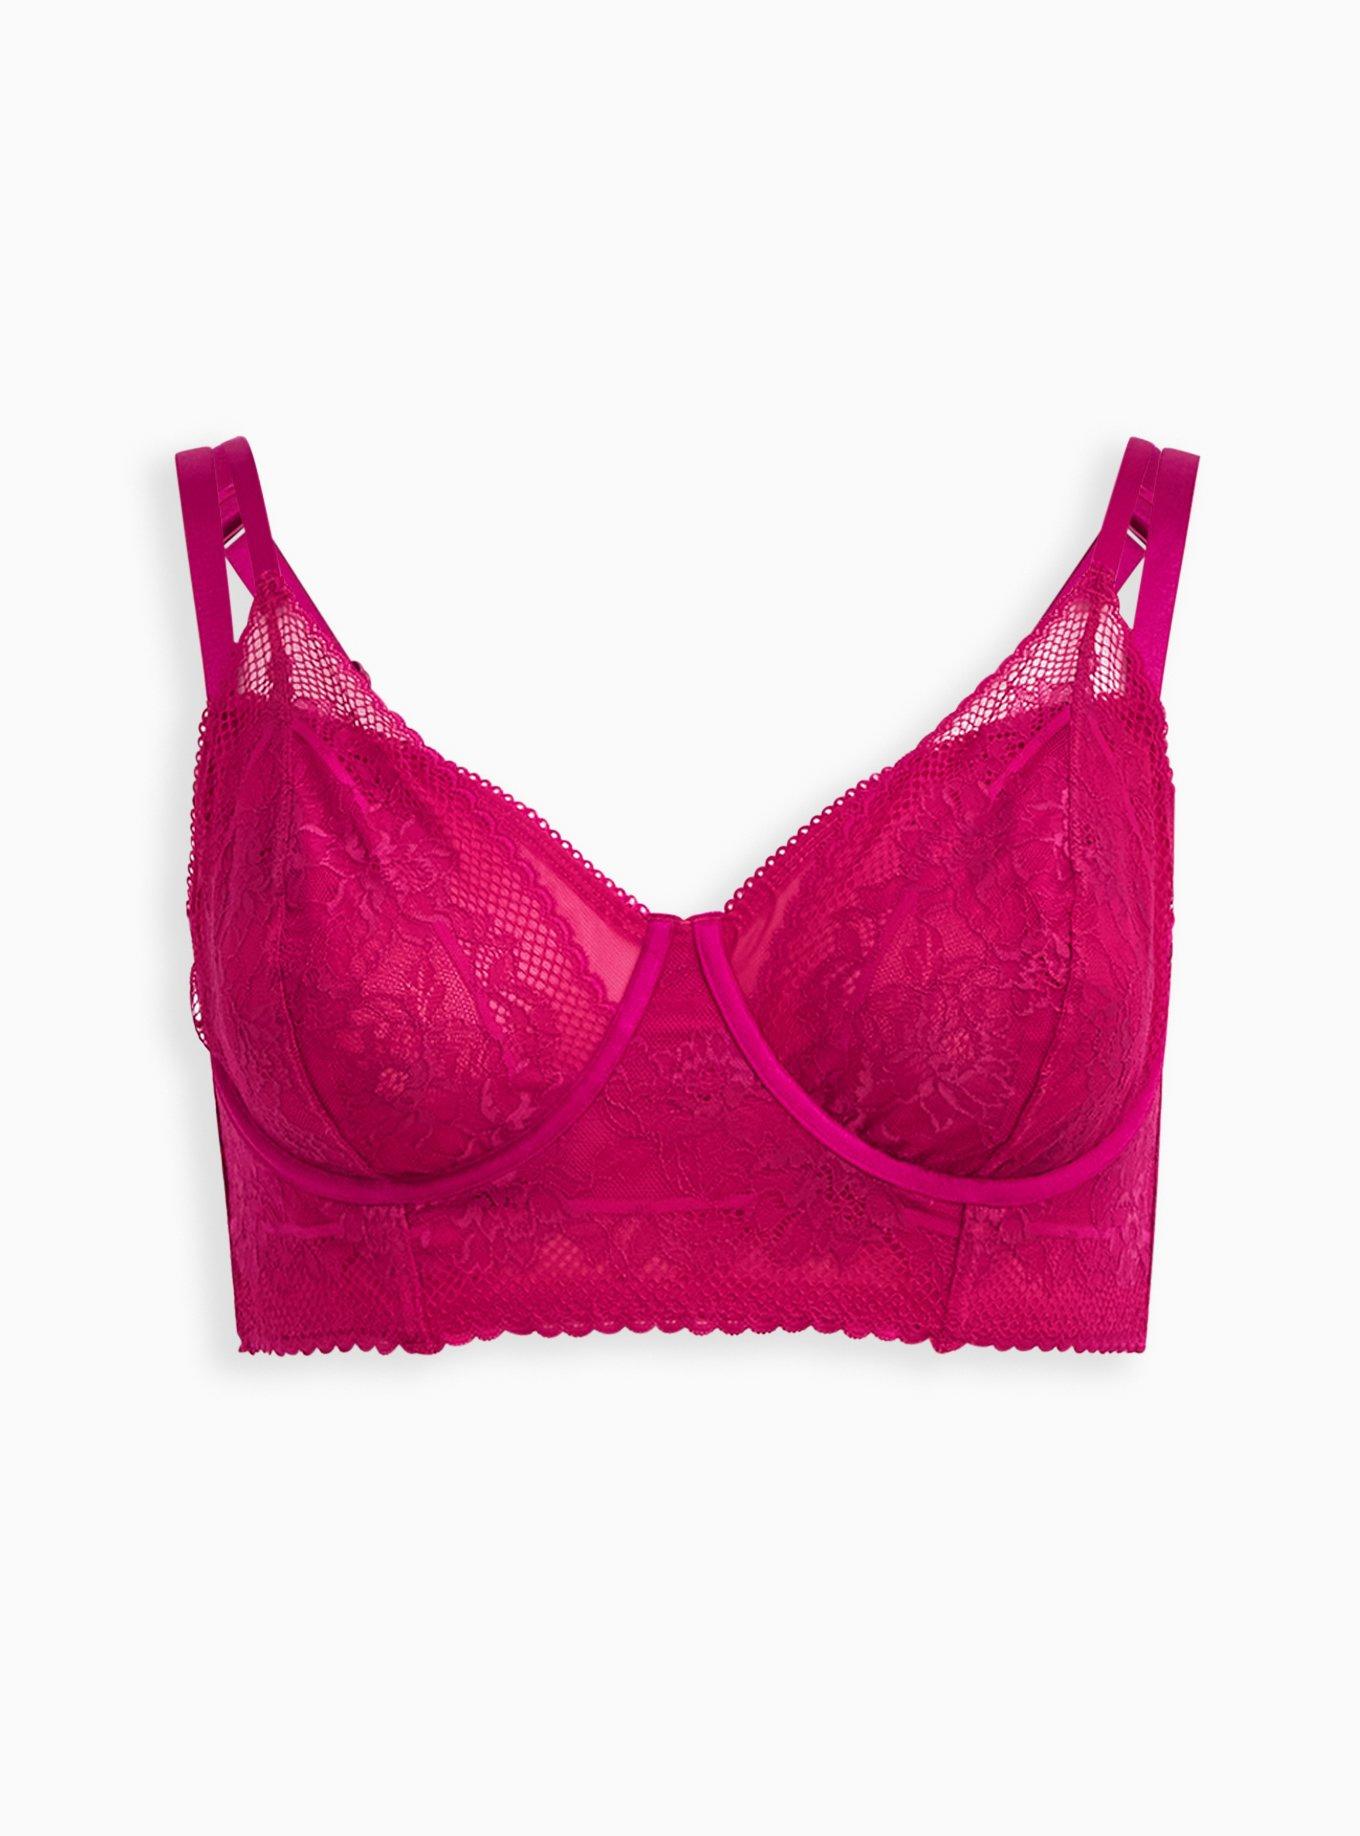 PINK - Victoria's Secret colorful lightly lined denim lace bra size 36B -  $17 - From maria